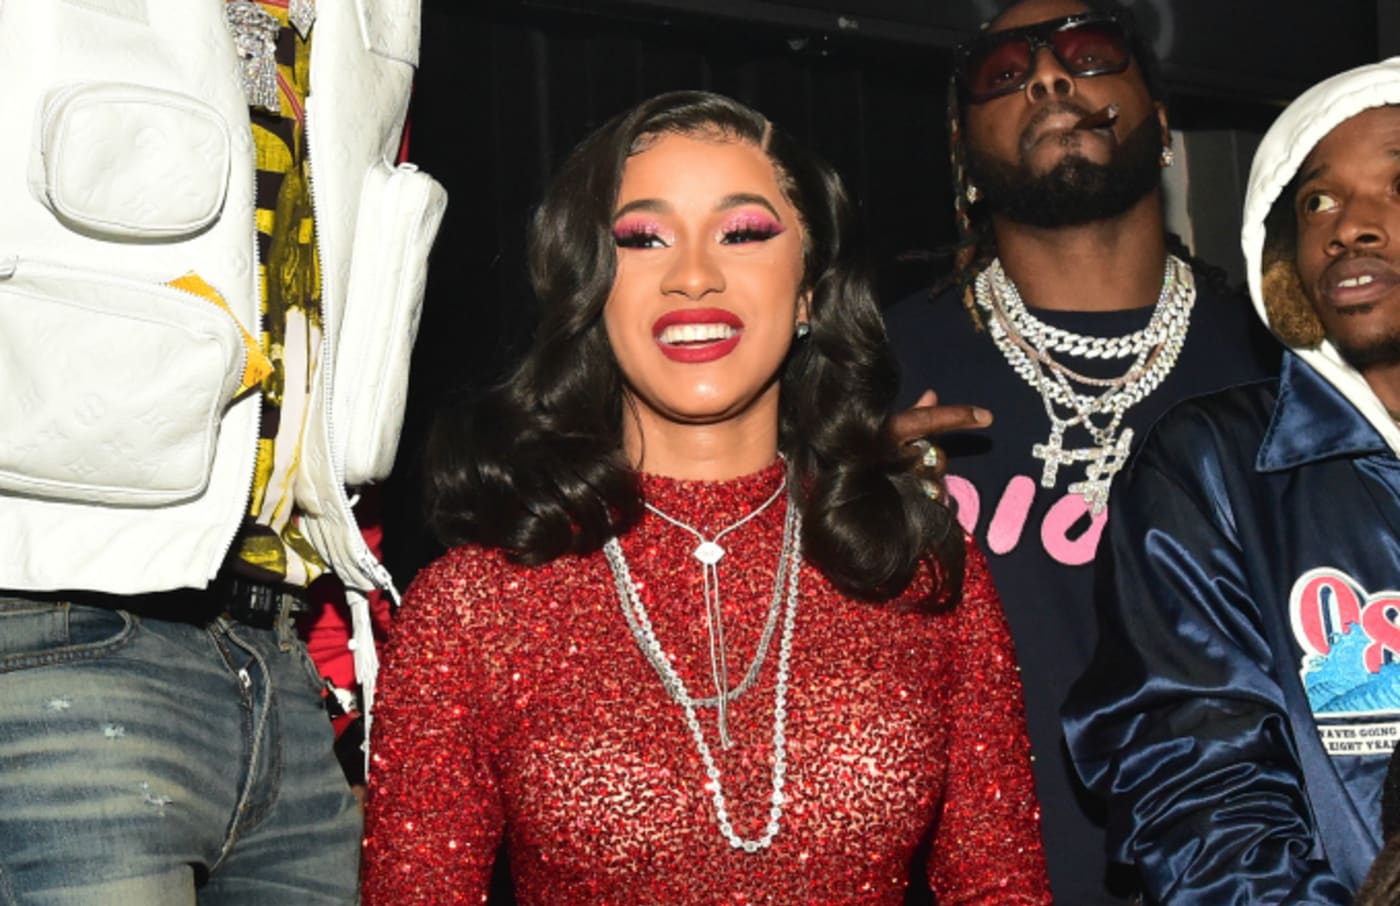 Offset and Cardi B attend Offset's 'Father of 4' album release party